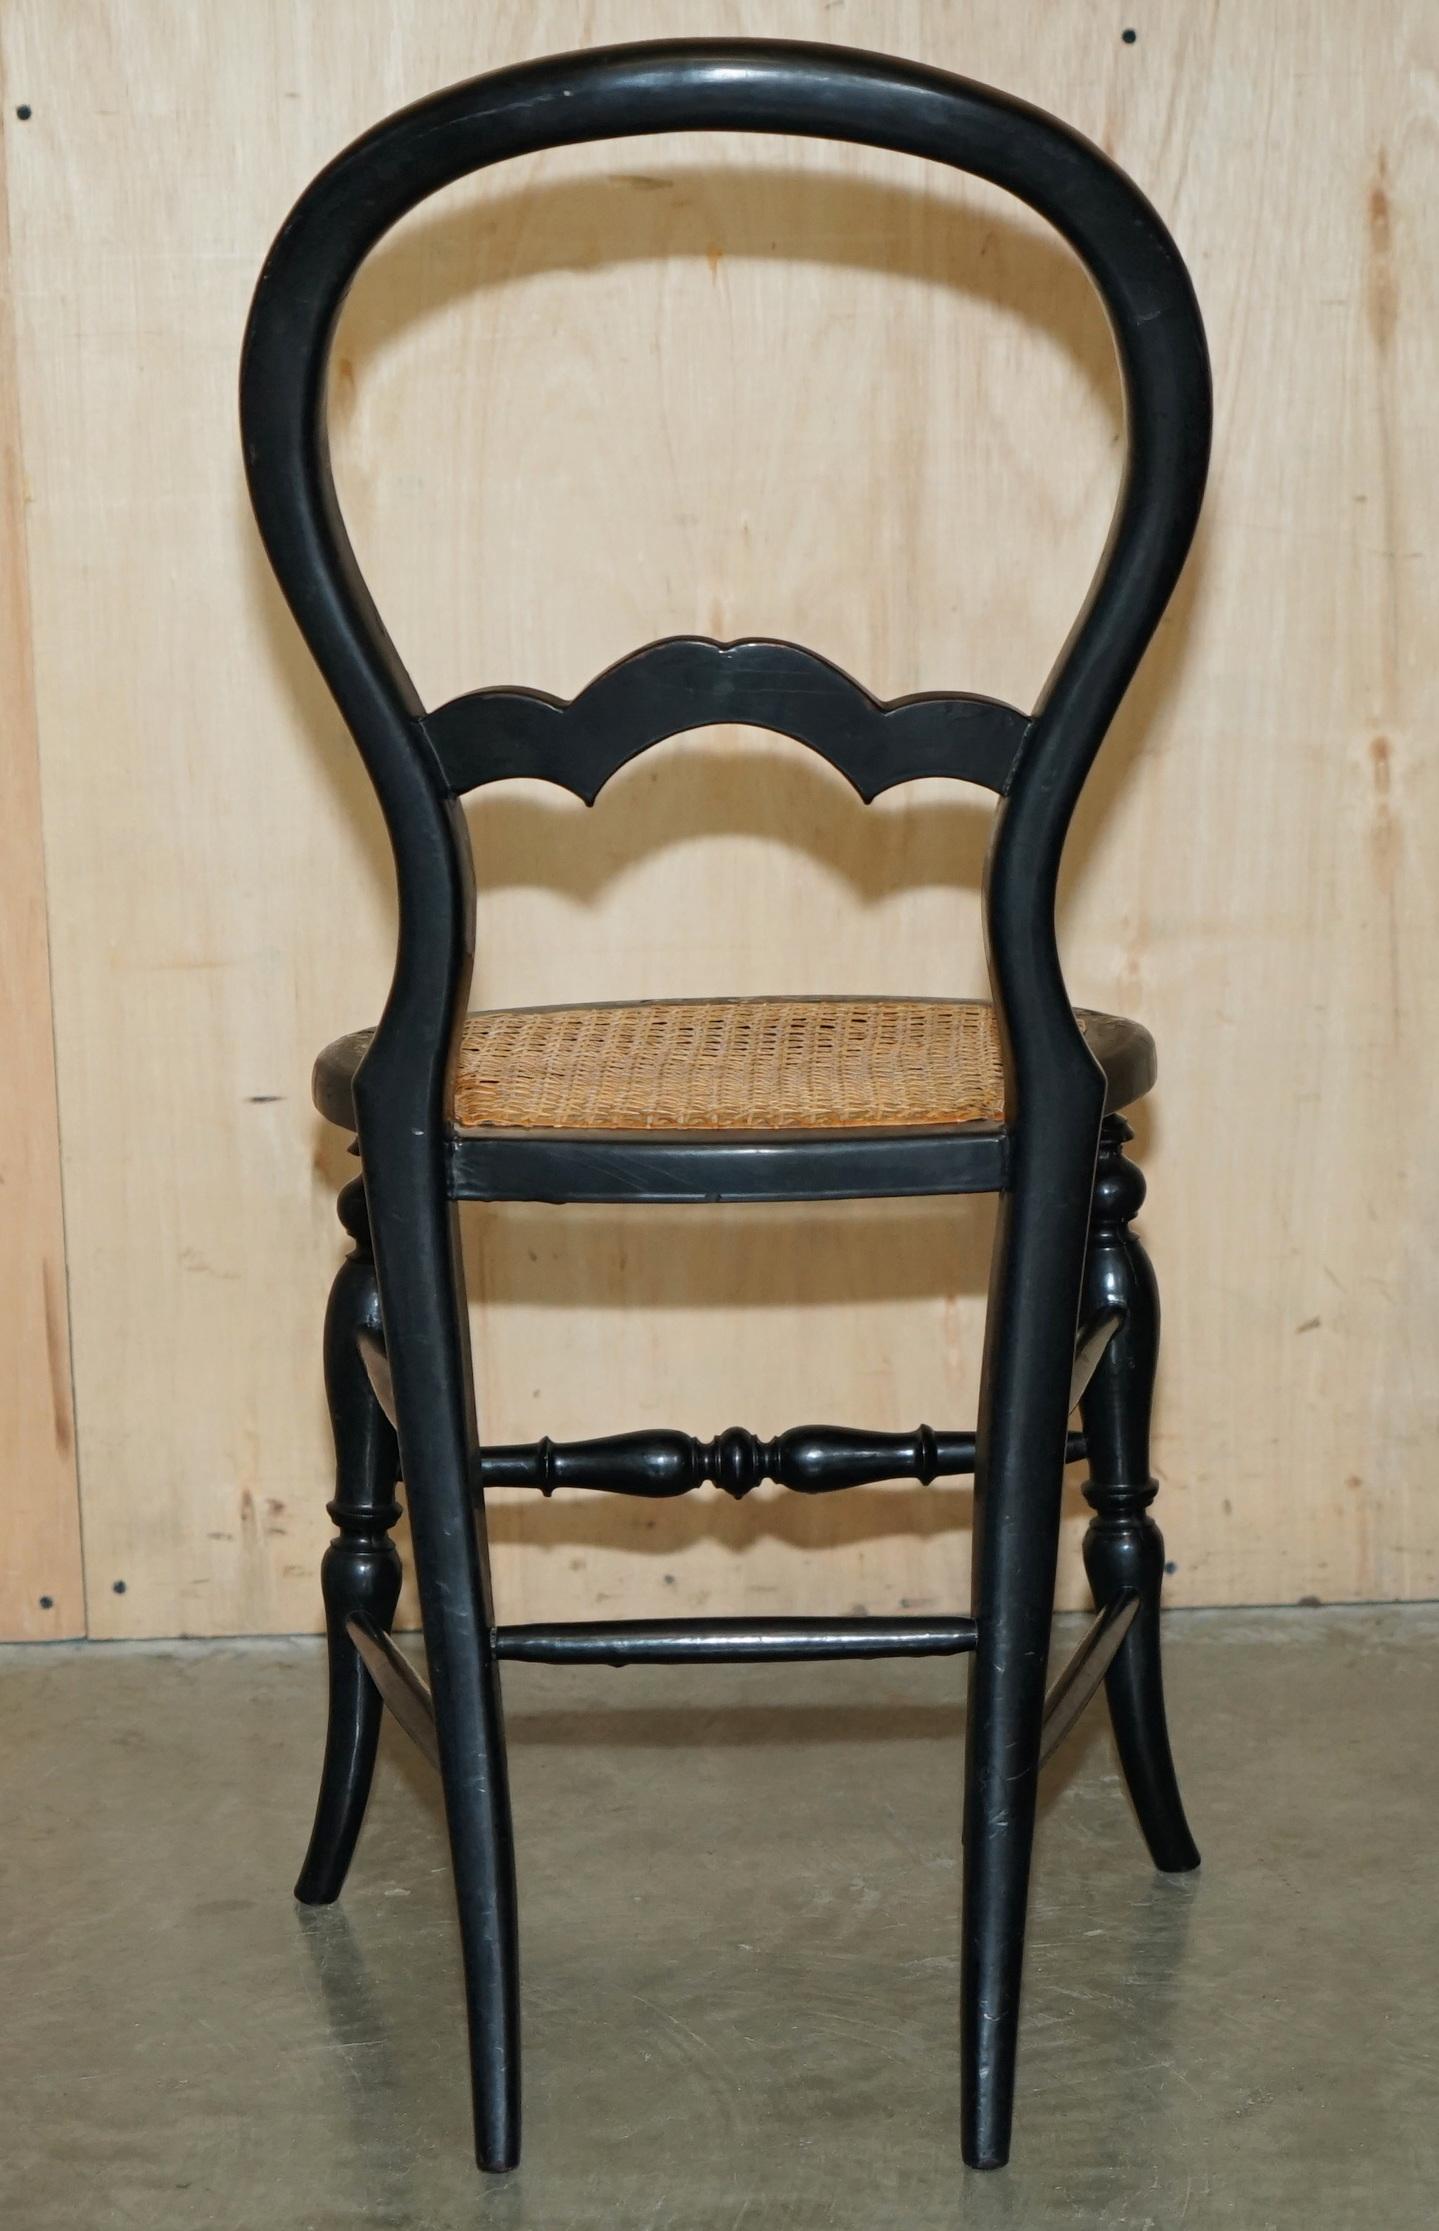 VIER FINE UND ANTIQUE REGENCY BERGERE MOTHER OF PEARL EBONISED SIDE CHAIRs im Angebot 6